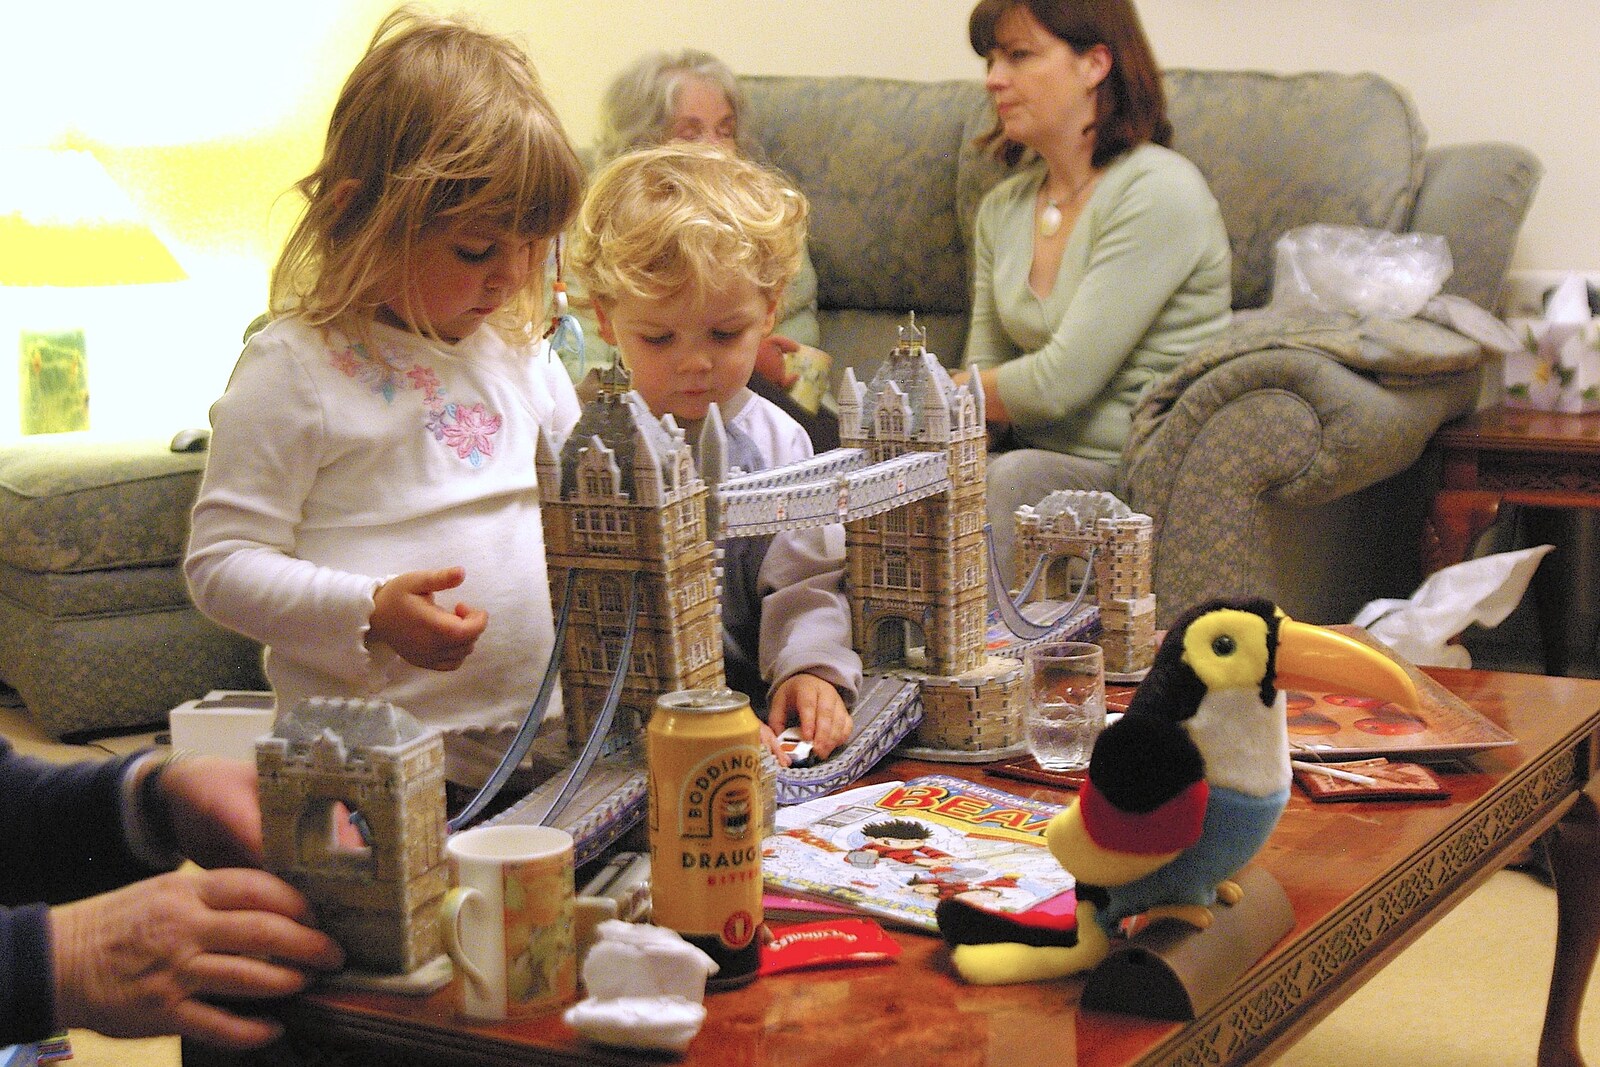 Syd and Rowan play with a model Tower Bridge from Boxing Day Miscellany, Hordle and Barton-on-Sea, Hampshire - 26th December 2005